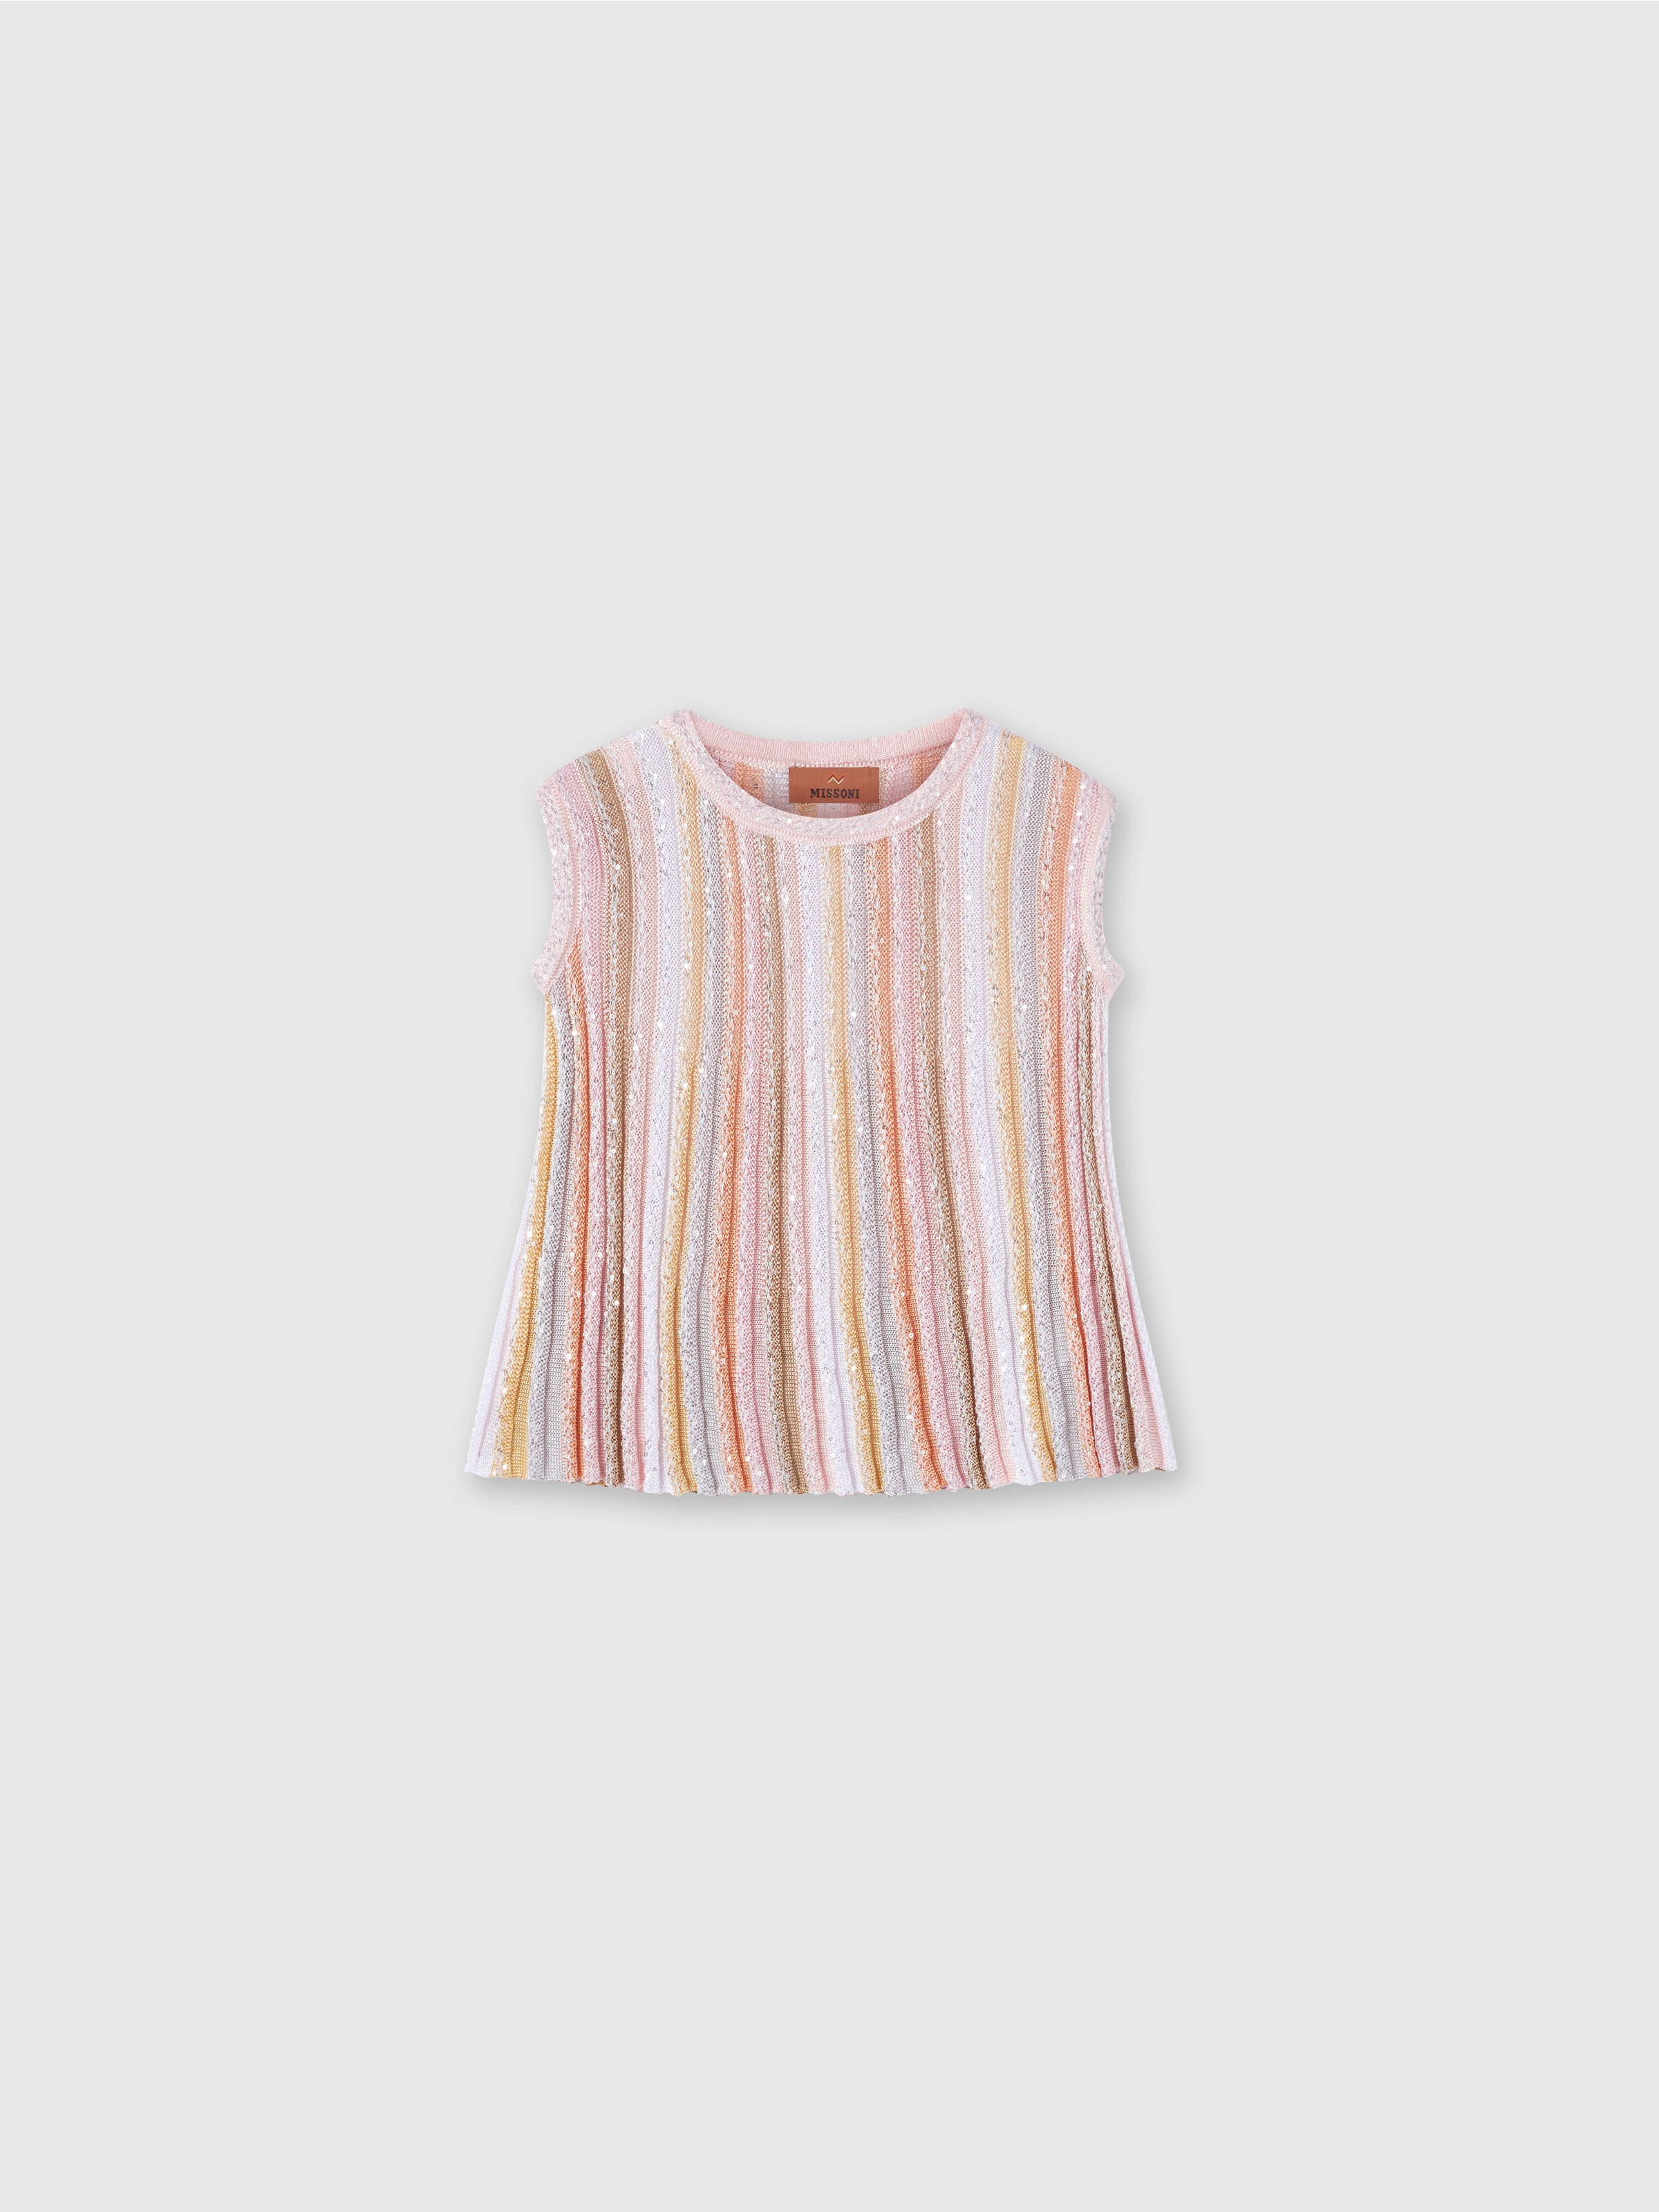 Sleeveless top in pleated viscose knit with sequins, Multicoloured  - 0